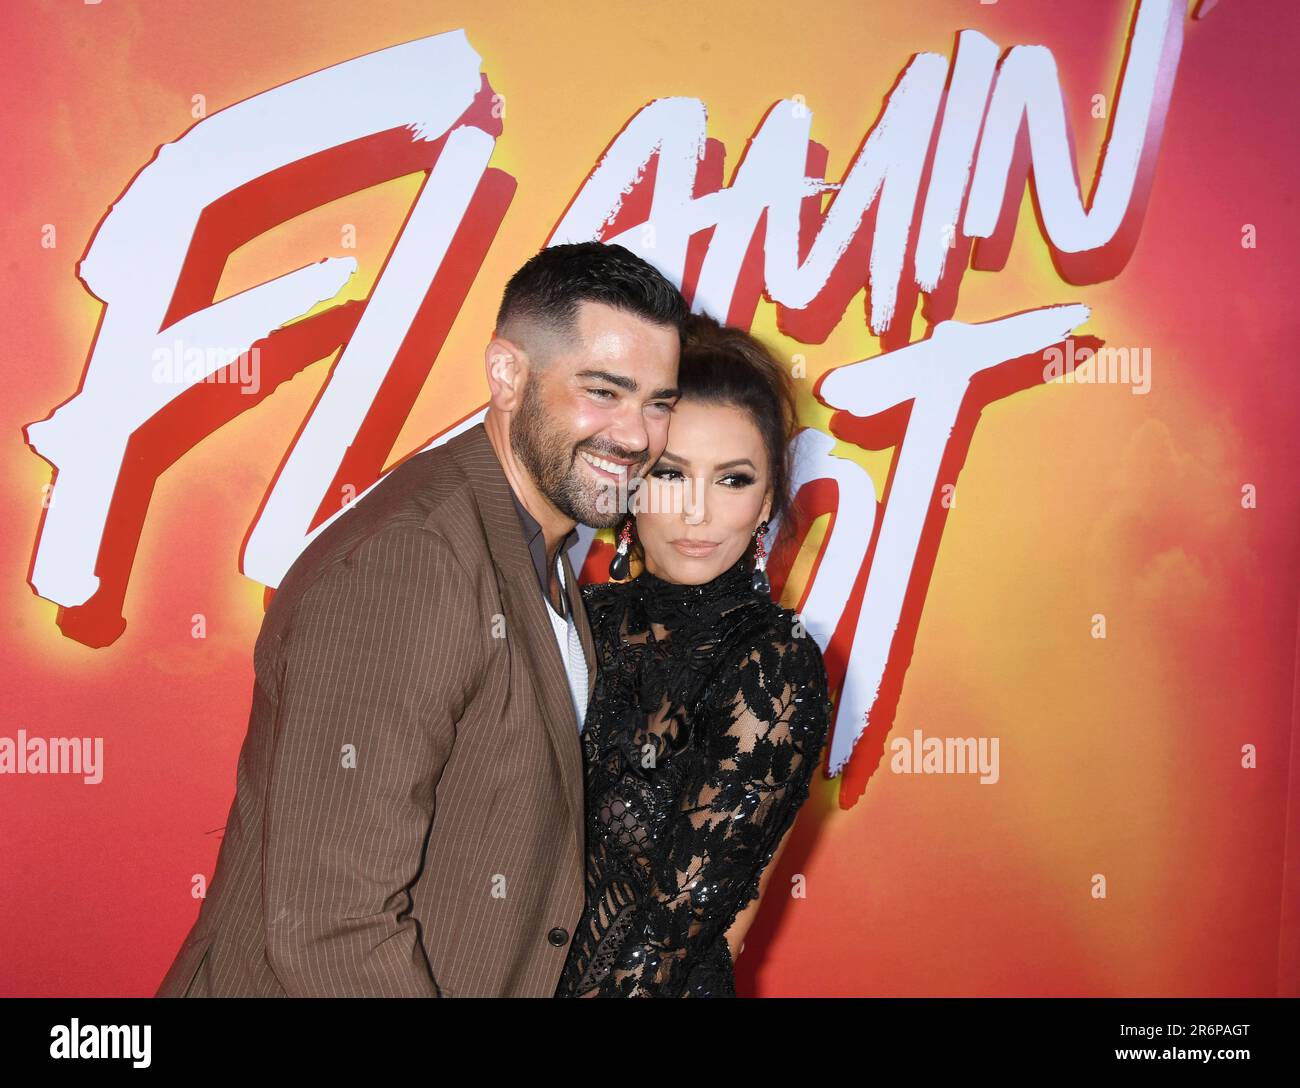 HOLLYWOOD, CALIFORNIA - JUNE 09: (L-R) Jesse Metcalfe and Eva Longoria attend the special screening of Searchlight Pictures' 'Flamin' Hot' at Hollywoo Stock Photo